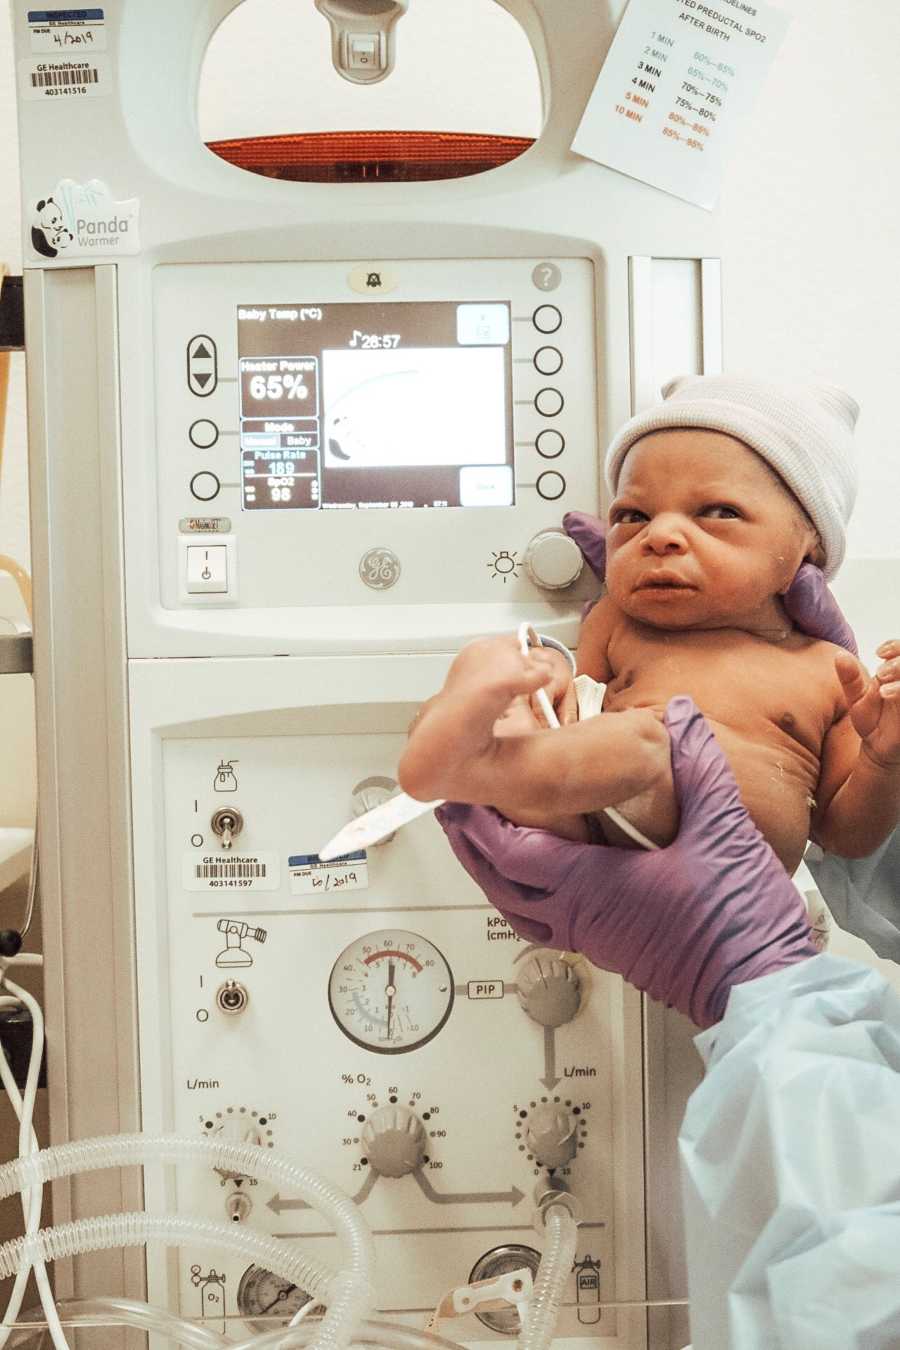 Newborn is held by doctor in front of monitor